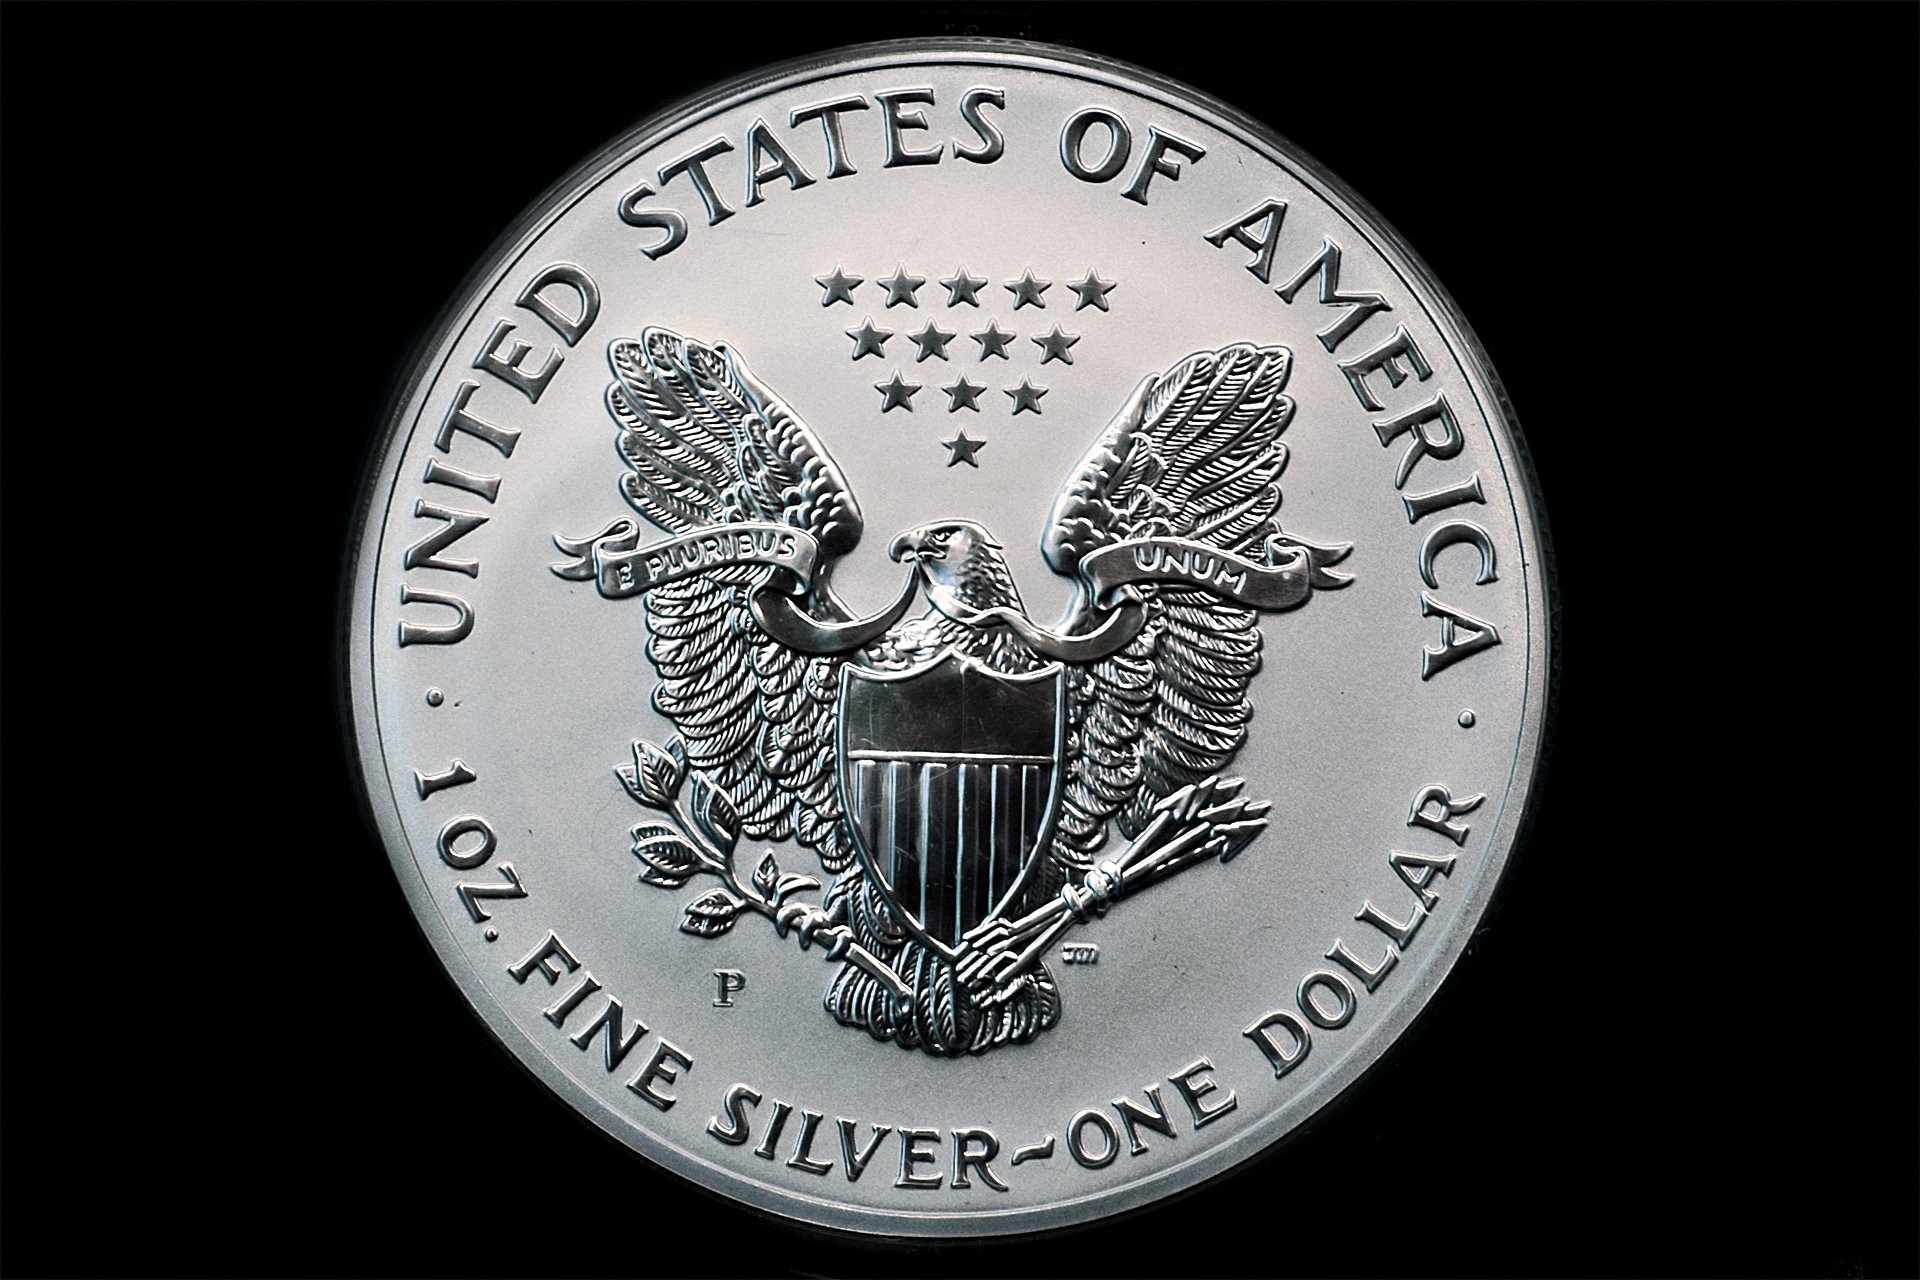 Silver Eagle Coins HD Wallpaper For